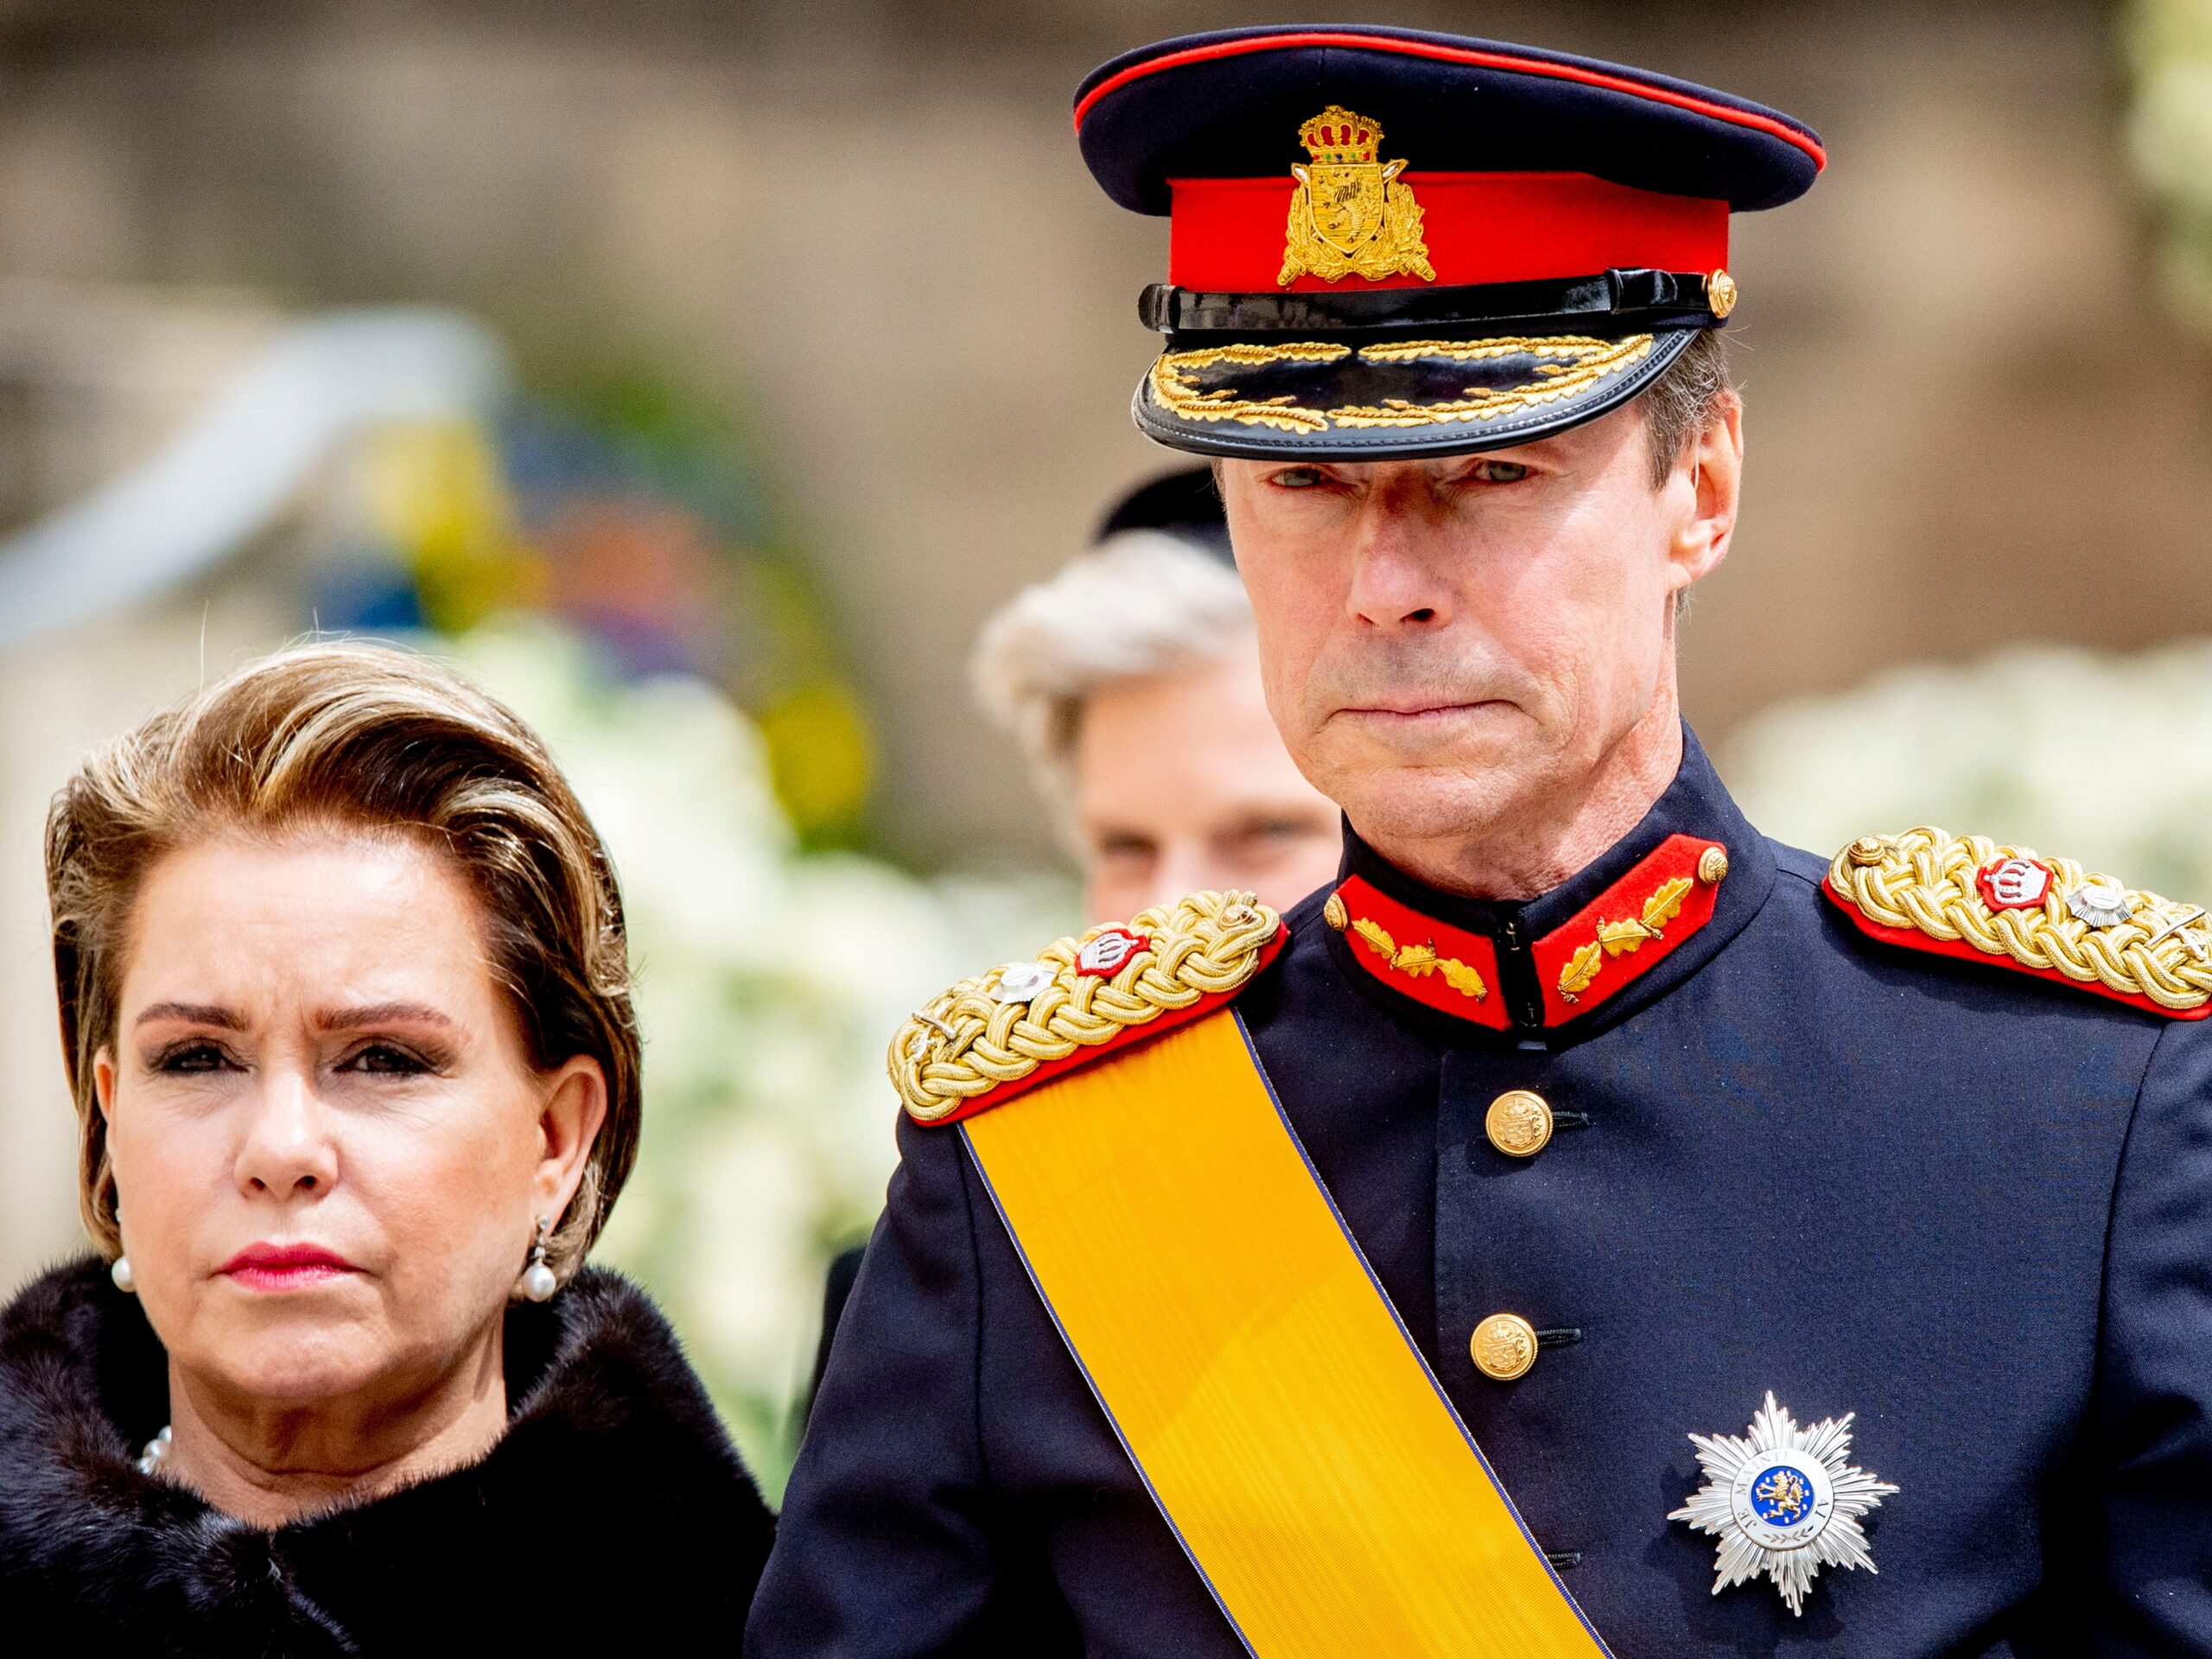 Grand Duke Henri and Grand Duchess Maria Teresa of Luxembourg attend the funeral of Grand Duke Jean of Luxembourg on May 4, 2019 in Luxembourg.